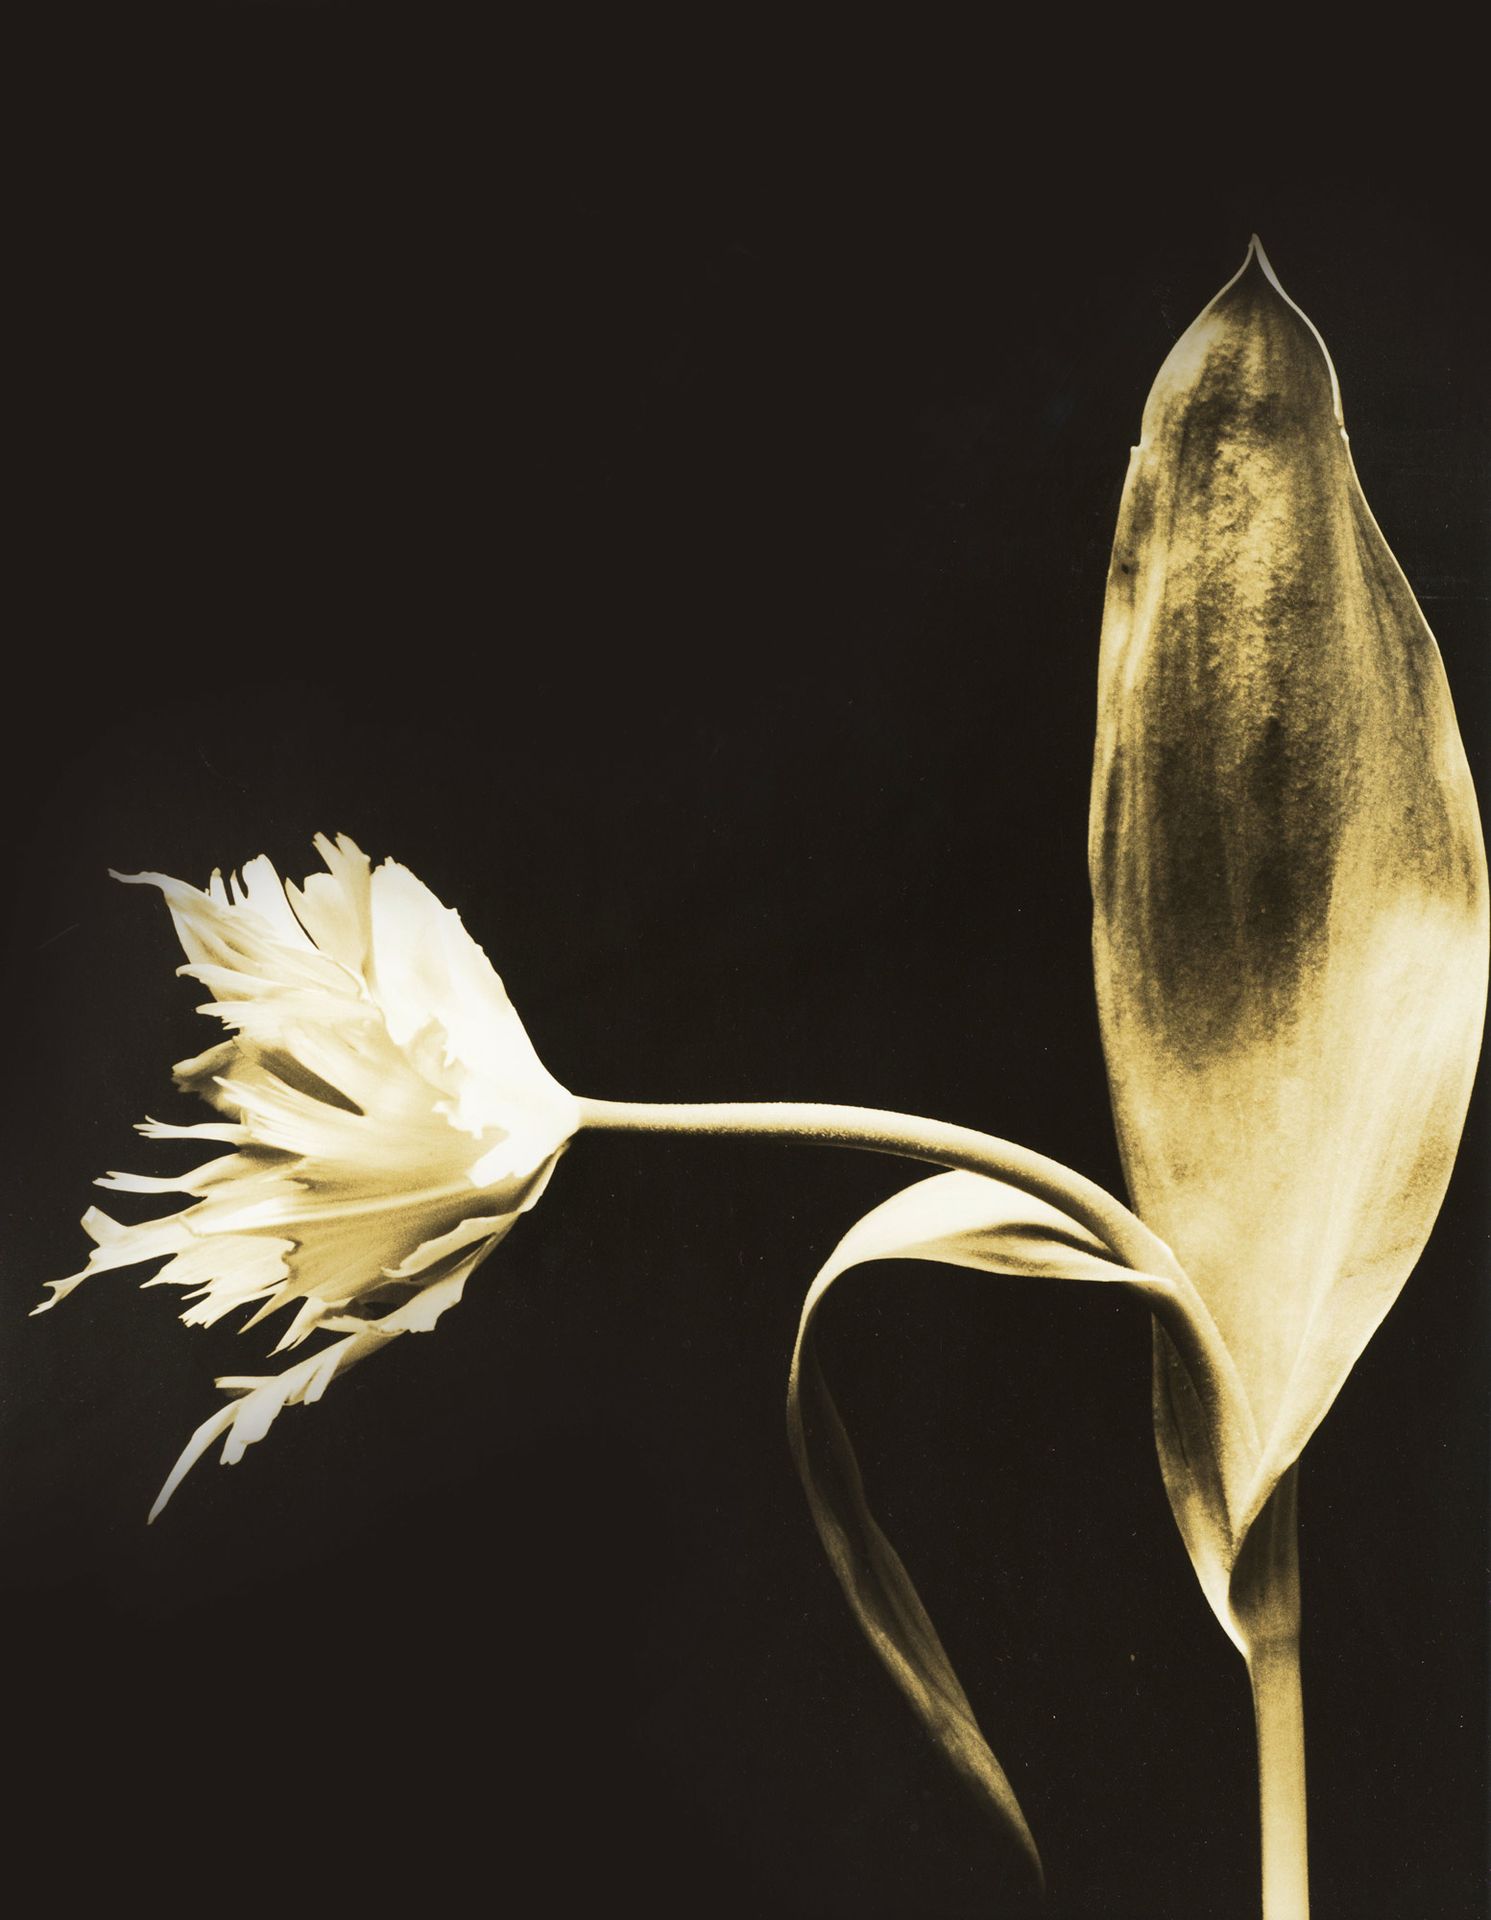 MICHAEL DWECK (né en 1957) TULIP II, 2007-2008
Silver print
Signed, titled and d&hellip;